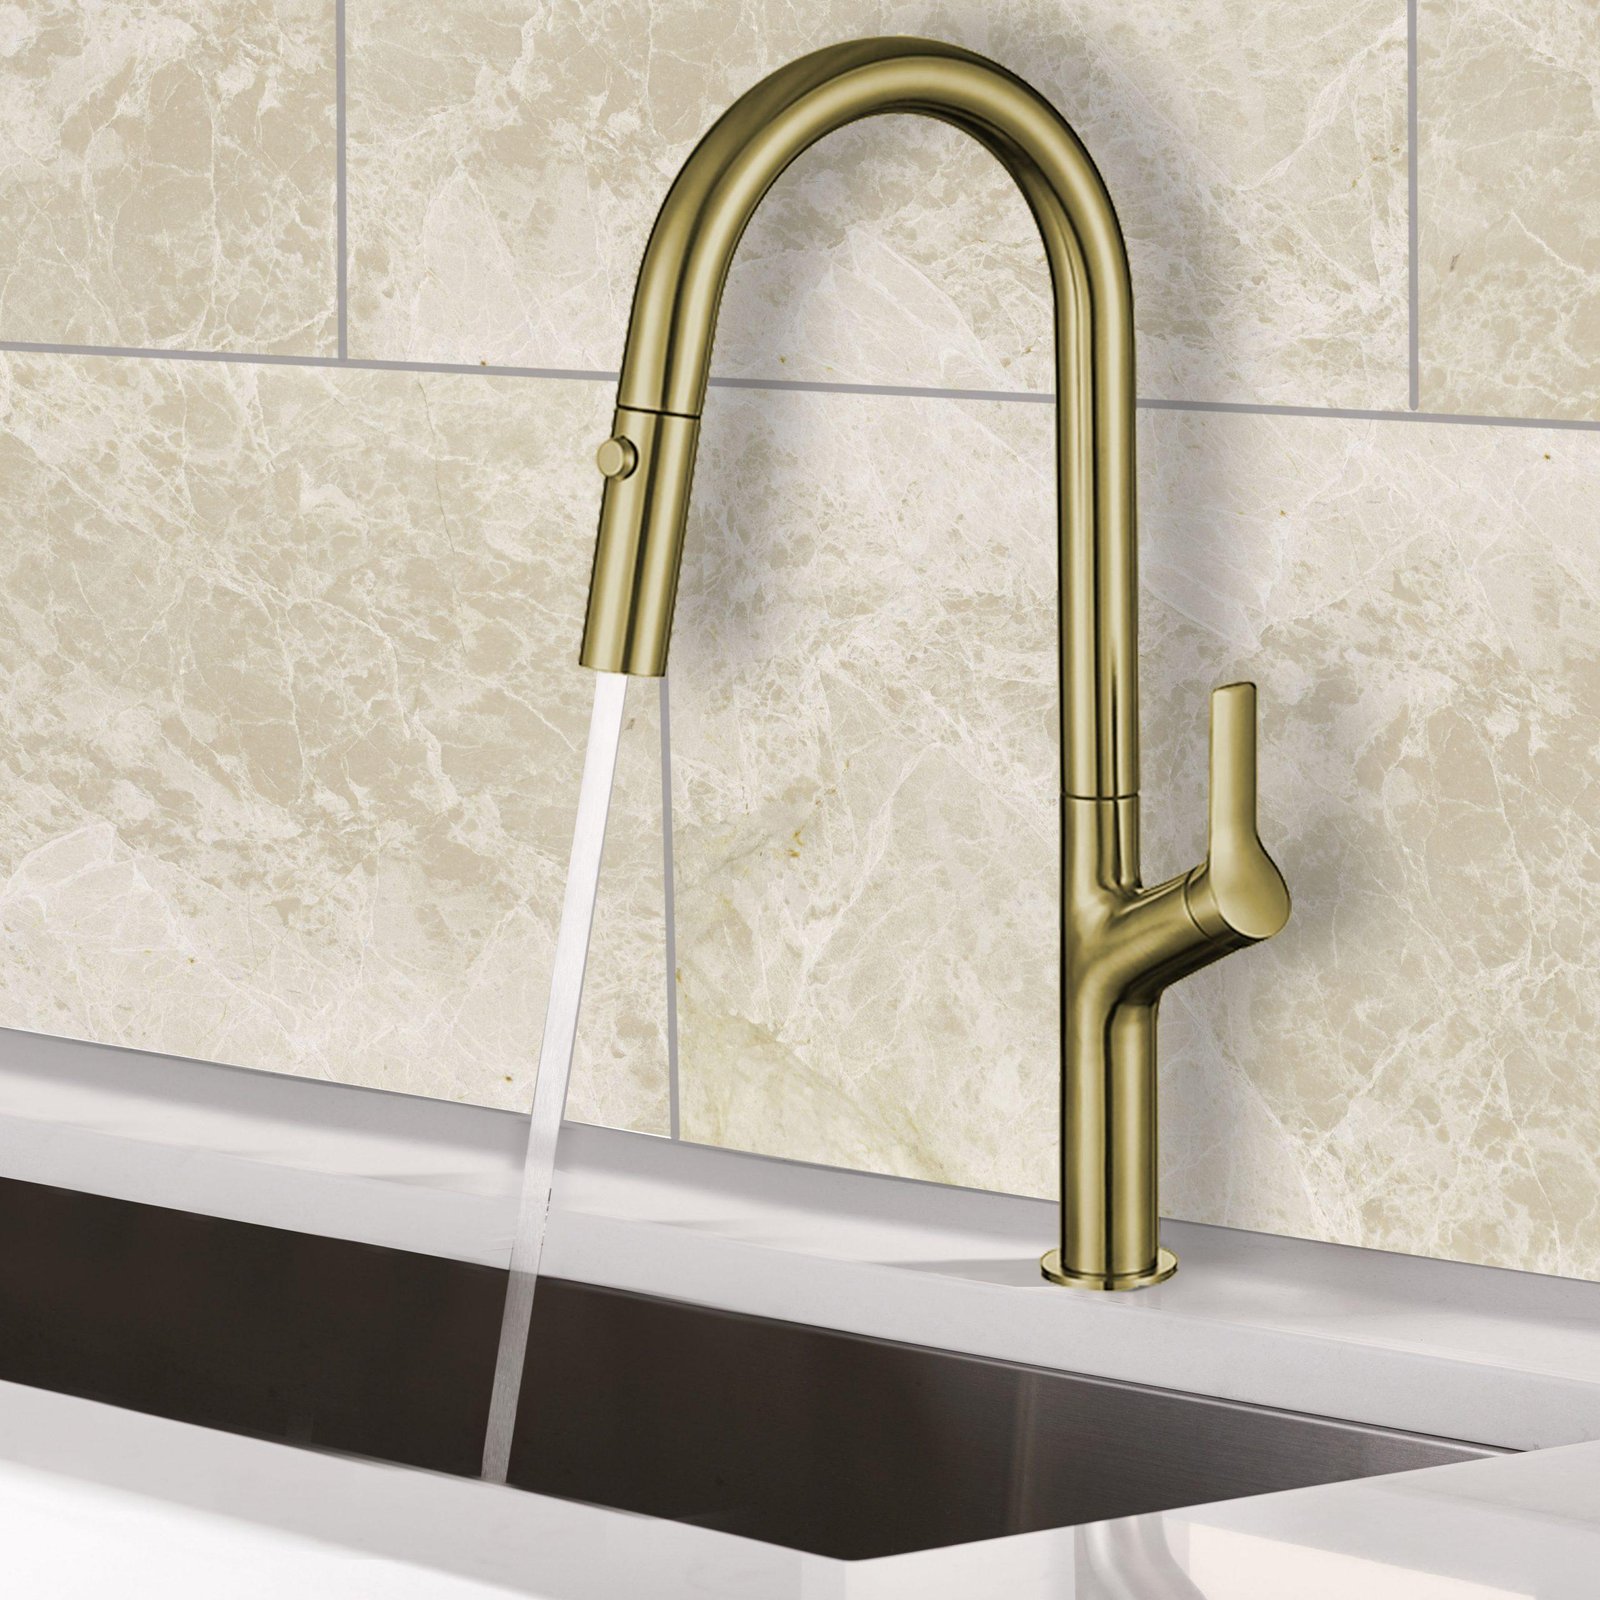 XL Vision - Kitchen Pull-Out Mixer Brushed Gold PVD Finish